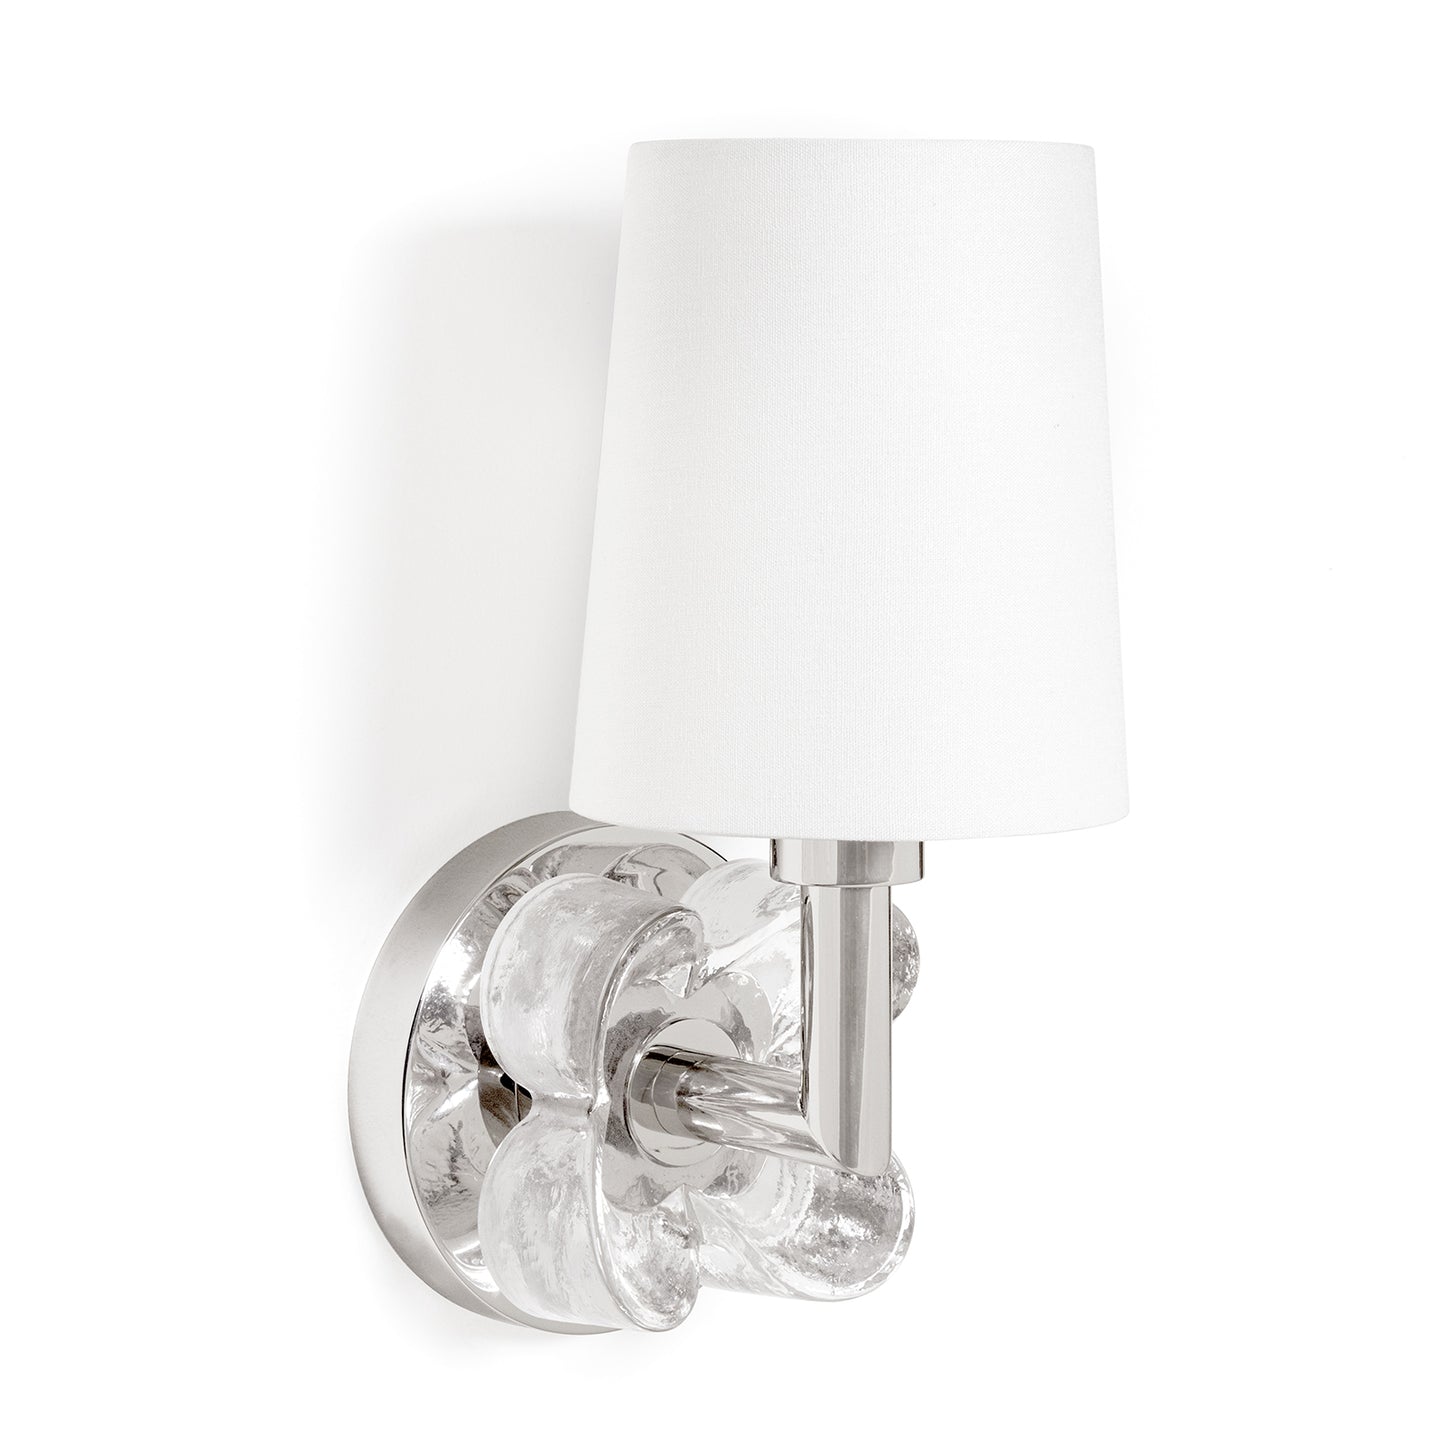 Bella Sconce in Polished Nickel by Regina Andrew